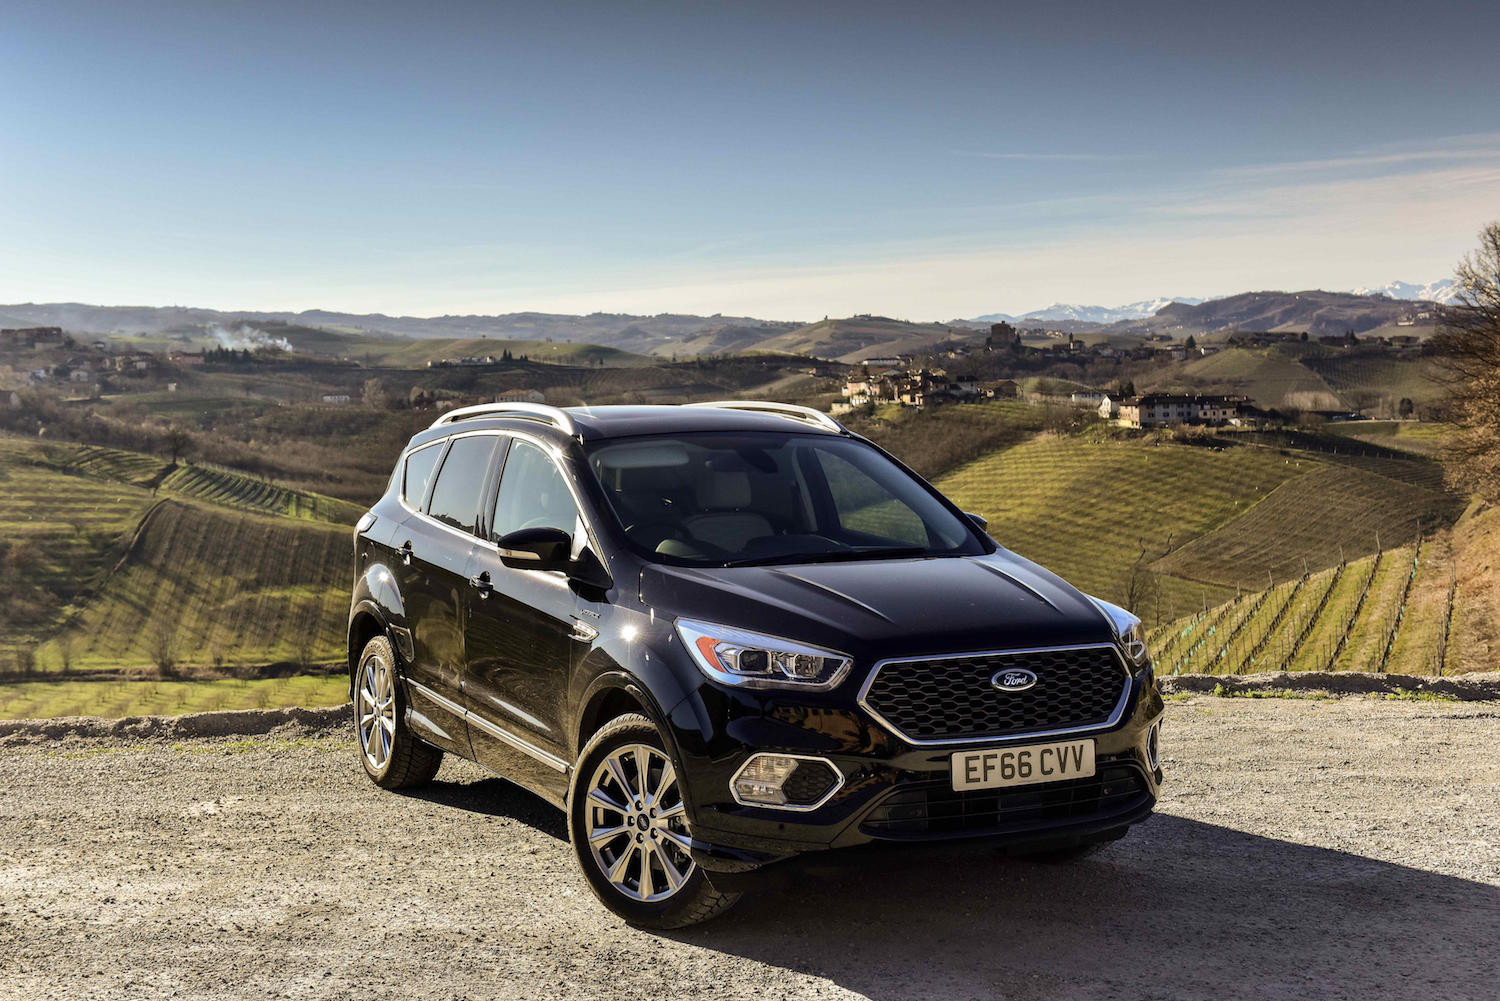 Black Ford Kuga parked facing three-quarters overlooking countryside.